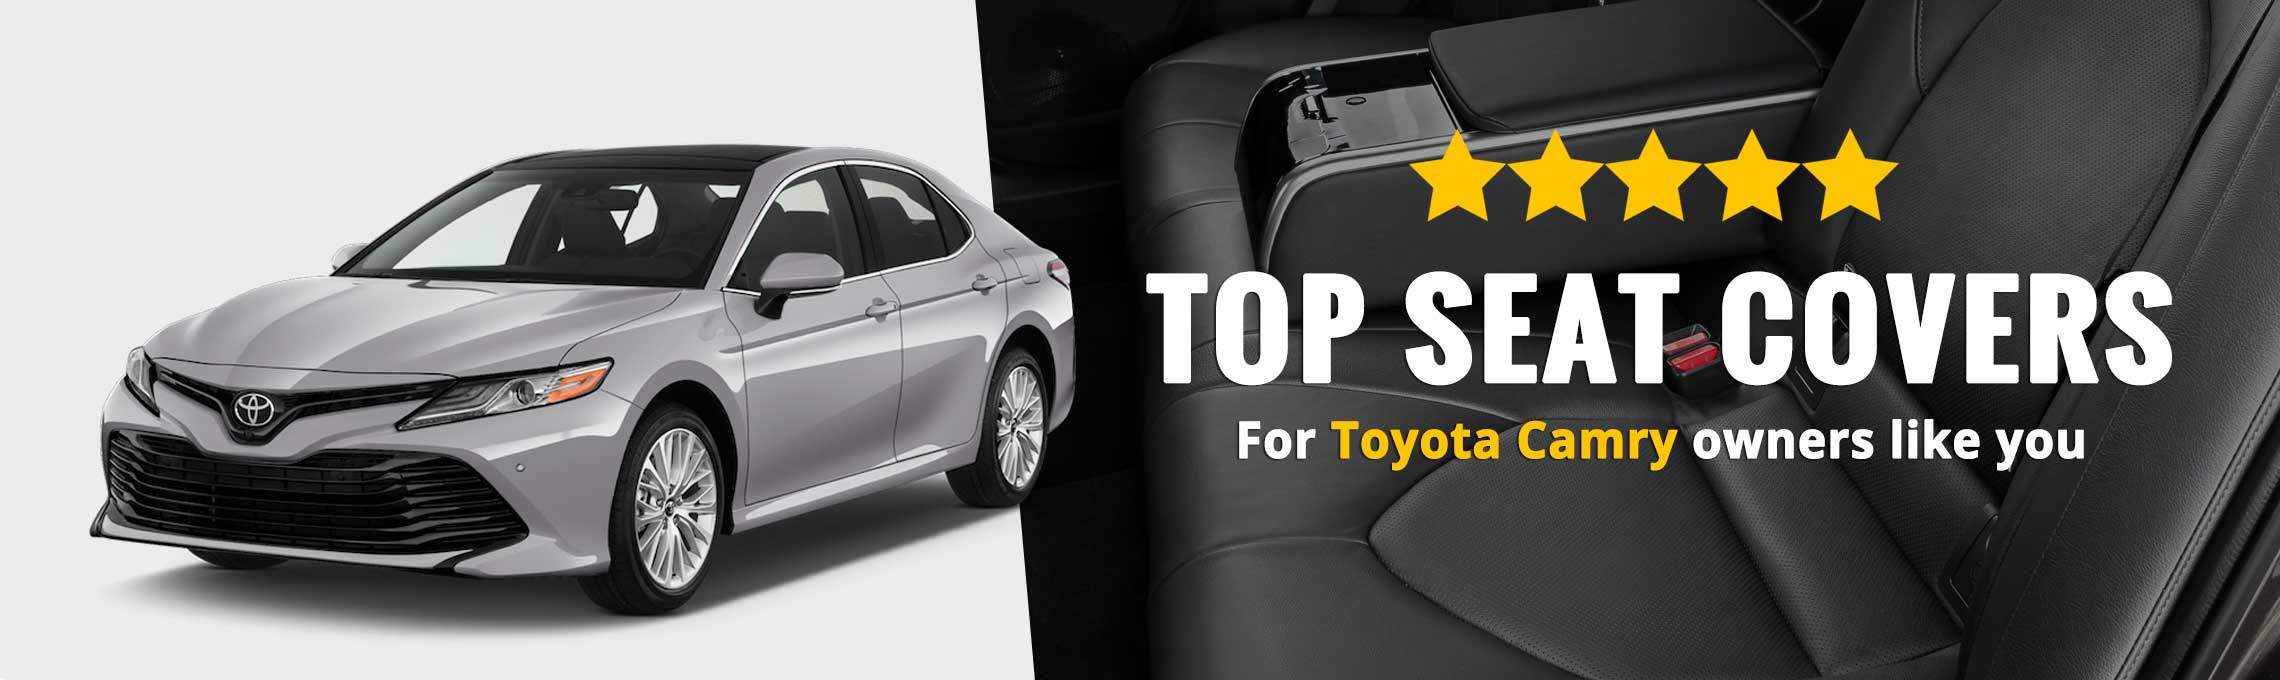 2011 Toyota Camry Seat Covers ~ Best Toyota